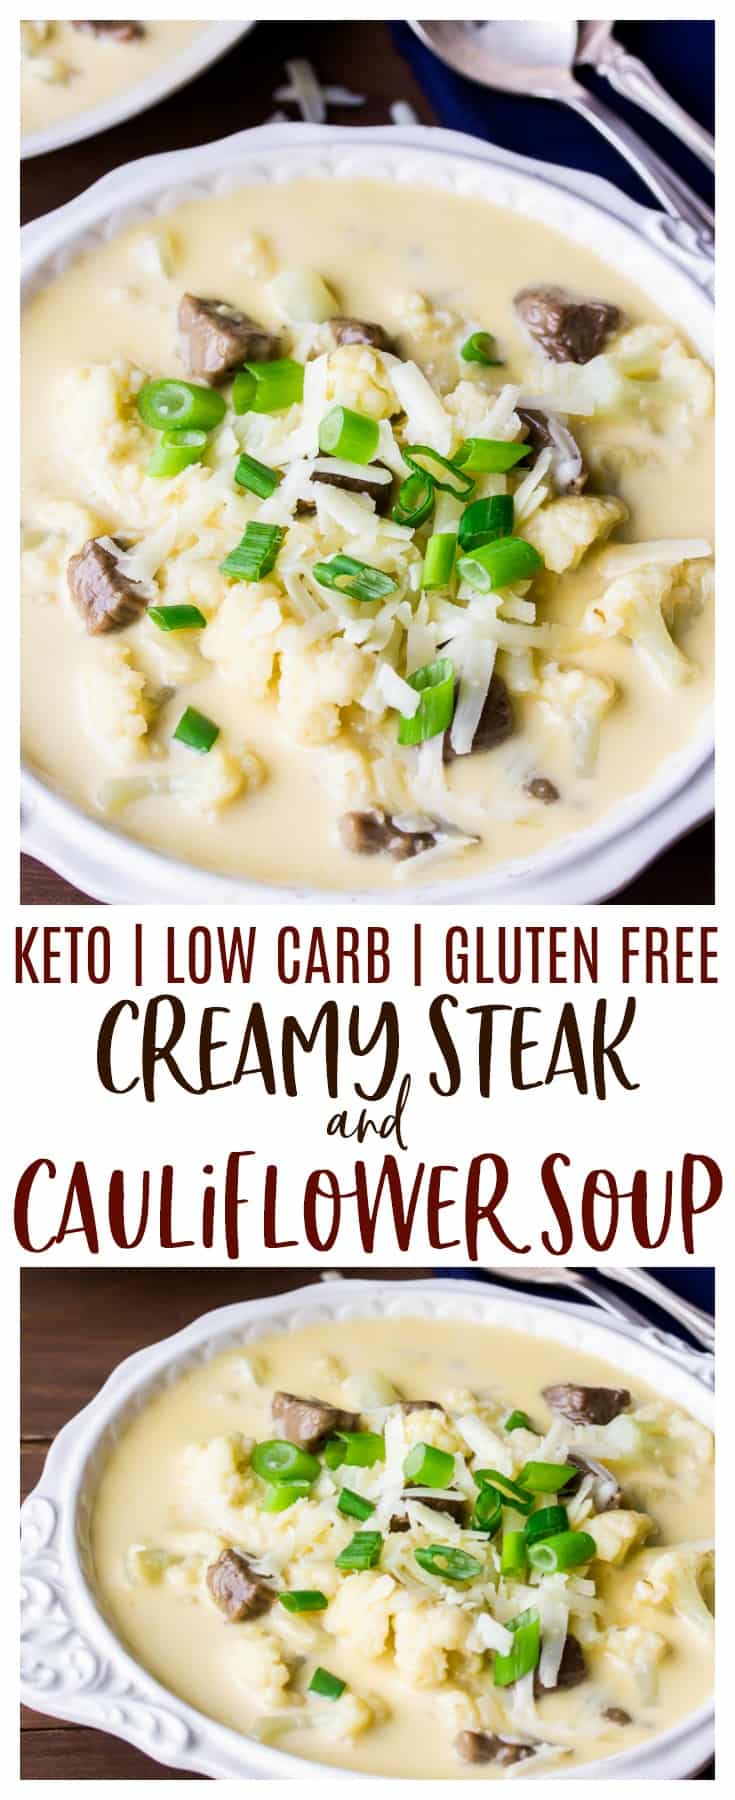 Low Carb Steak and Cauliflower Soup (keto, gluten free) - Delicious ...